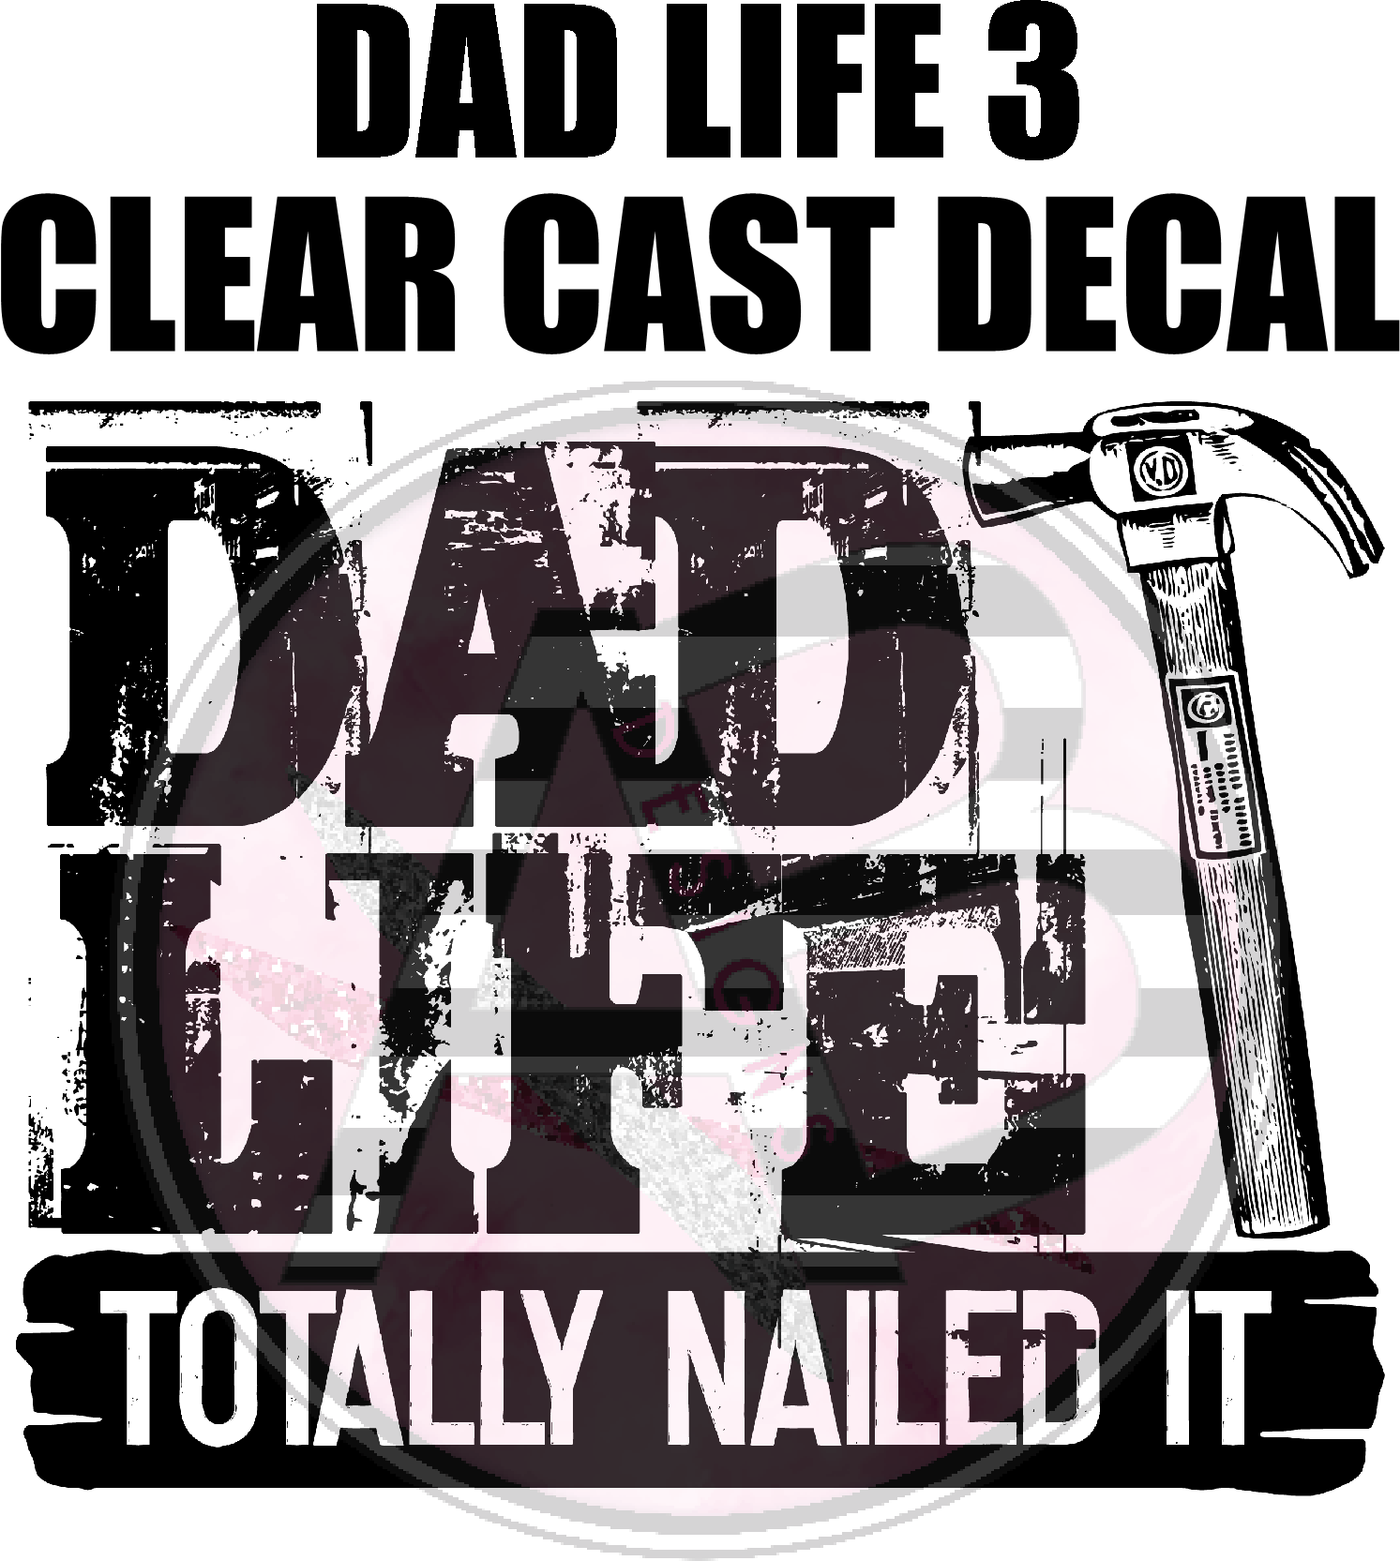 Dad Life 3 - Clear Cast Decal